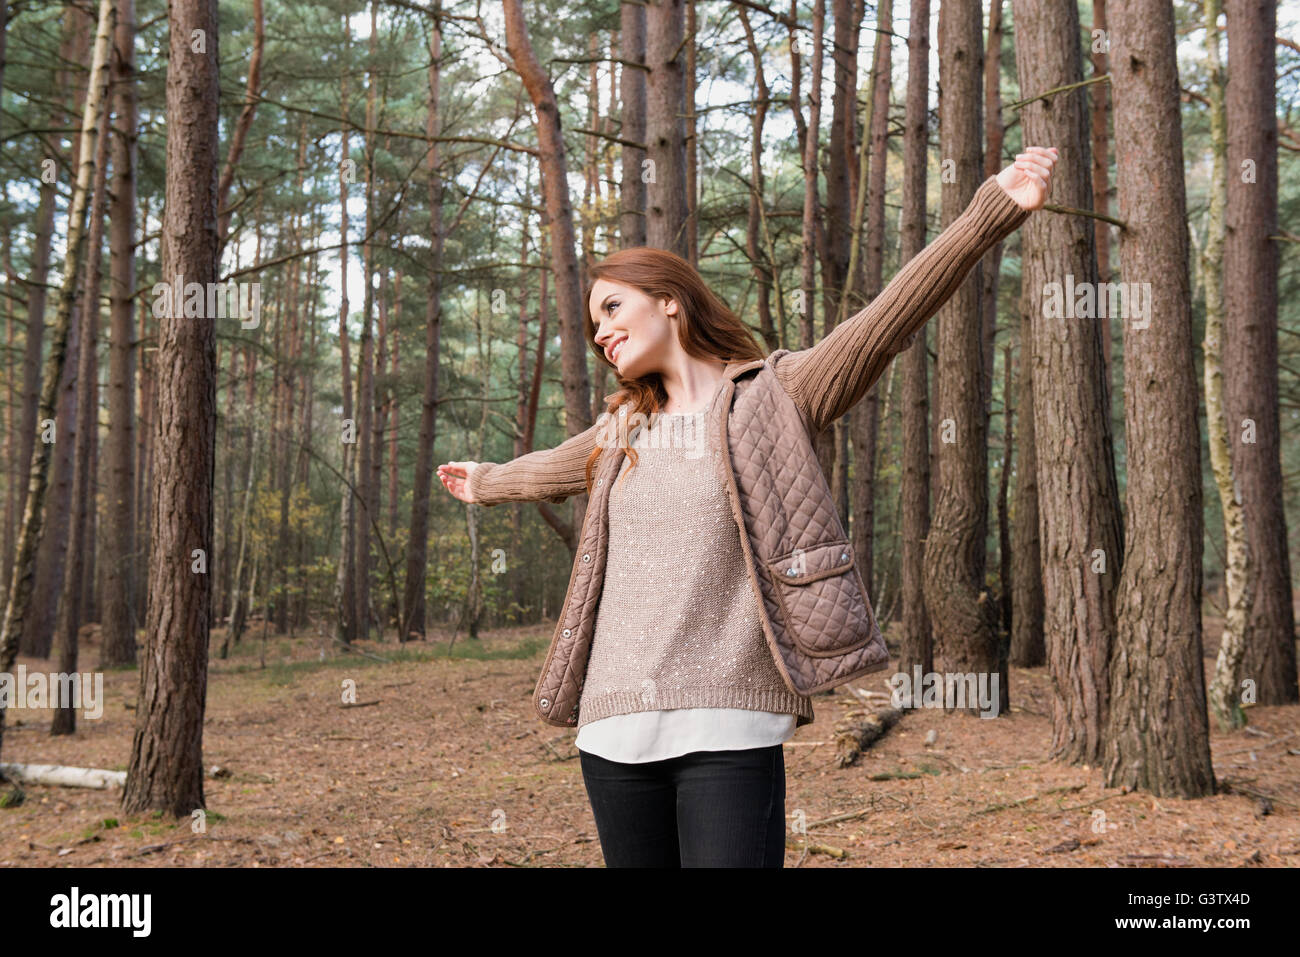 A young woman communing with nature in a forest in Autumn. Stock Photo